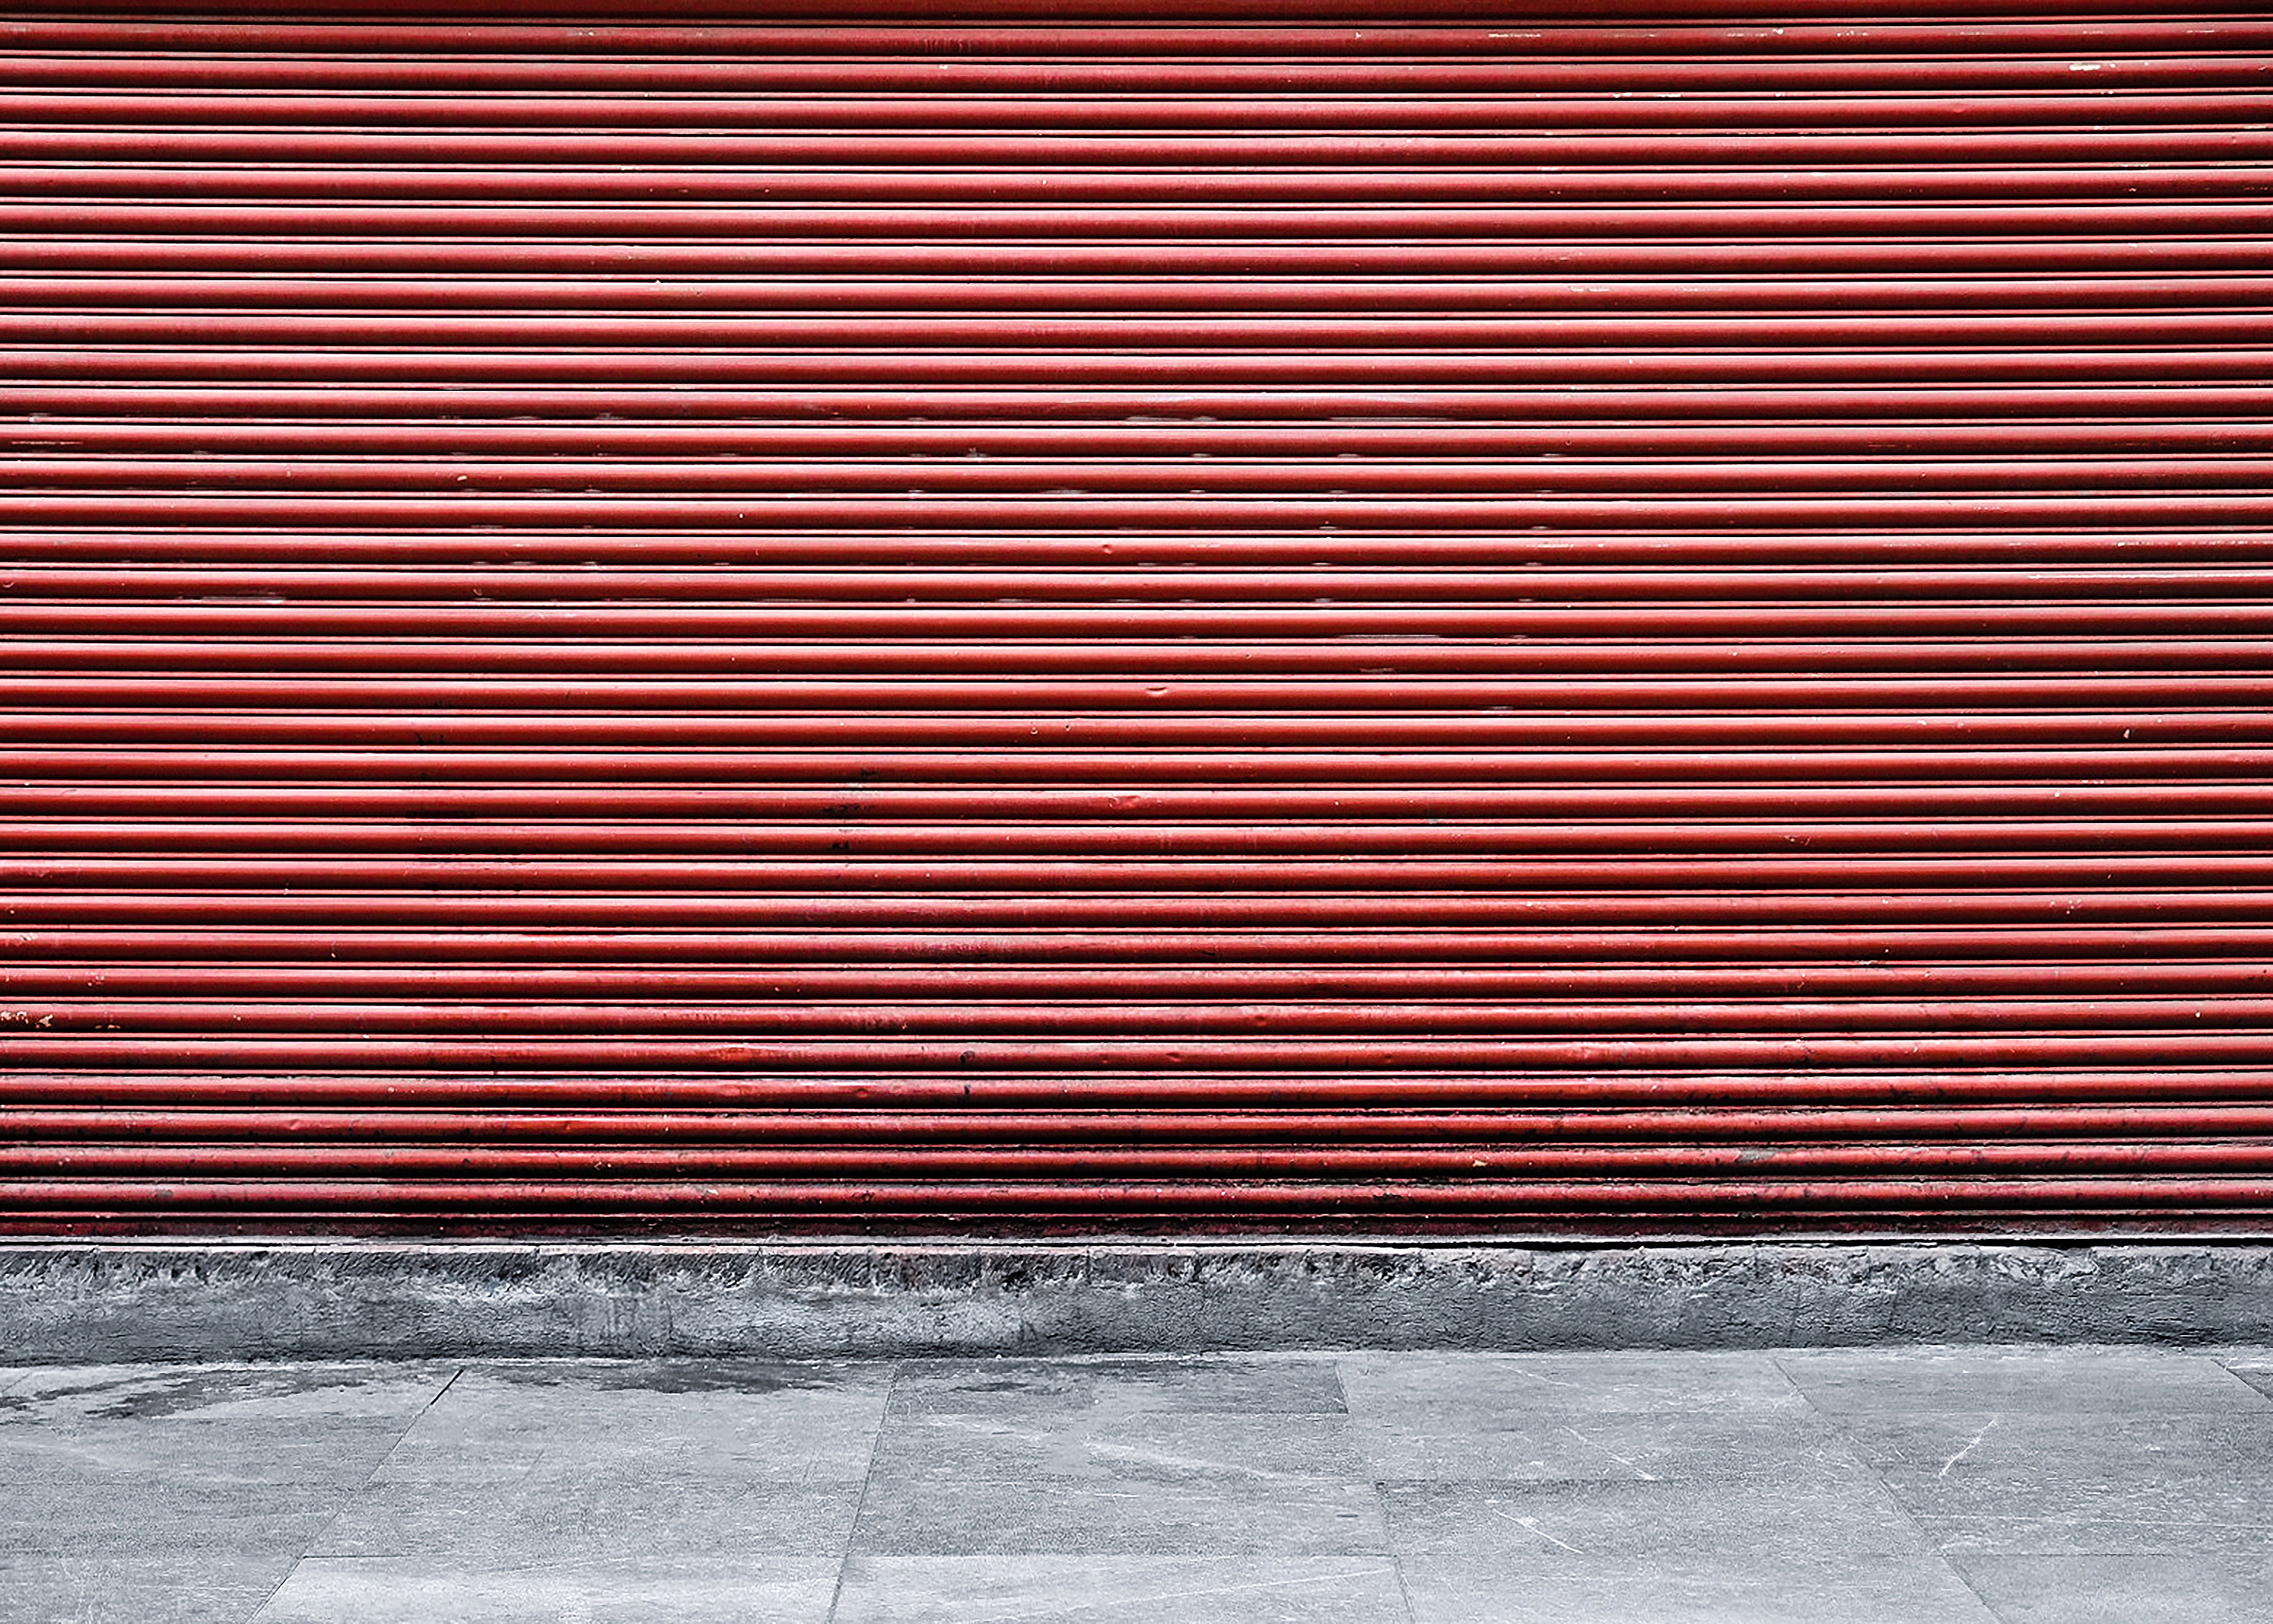 gray concrete pavement beside the red wall